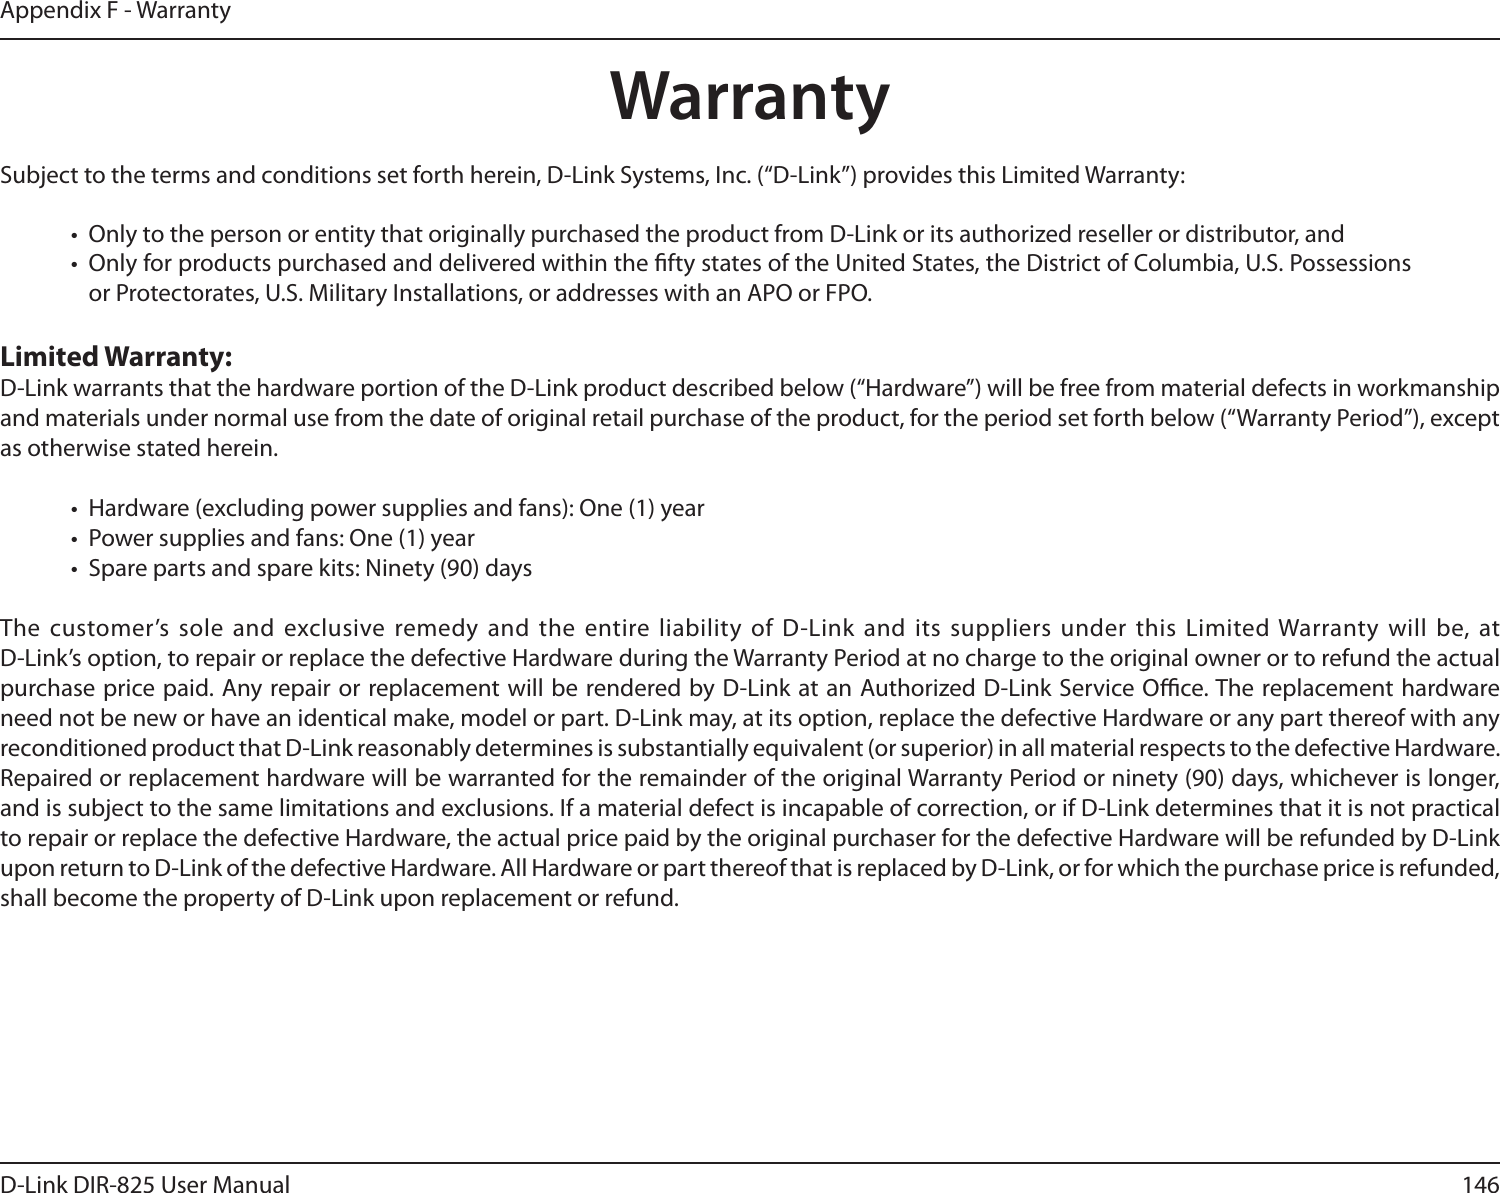 146D-Link DIR-825 User ManualAppendix F - WarrantyWarrantySubject to the terms and conditions set forth herein, D-Link Systems, Inc. (“D-Link”) provides this Limited Warranty:•  Only to the person or entity that originally purchased the product from D-Link or its authorized reseller or distributor, and•  Only for products purchased and delivered within the fty states of the United States, the District of Columbia, U.S. Possessions or Protectorates, U.S. Military Installations, or addresses with an APO or FPO.Limited Warranty:D-Link warrants that the hardware portion of the D-Link product described below (“Hardware”) will be free from material defects in workmanship and materials under normal use from the date of original retail purchase of the product, for the period set forth below (“Warranty Period”), except as otherwise stated herein.•  Hardware (excluding power supplies and fans): One (1) year•  Power supplies and fans: One (1) year•  Spare parts and spare kits: Ninety (90) daysThe customer’s sole  and exclusive remedy and  the entire liability of  D-Link  and its  suppliers under this  Limited Warranty will  be, at  D-Link’s option, to repair or replace the defective Hardware during the Warranty Period at no charge to the original owner or to refund the actual purchase price paid. Any repair or replacement will be rendered by D-Link at an Authorized D-Link Service Oce. The replacement hardware need not be new or have an identical make, model or part. D-Link may, at its option, replace the defective Hardware or any part thereof with any reconditioned product that D-Link reasonably determines is substantially equivalent (or superior) in all material respects to the defective Hardware. Repaired or replacement hardware will be warranted for the remainder of the original Warranty Period or ninety (90) days, whichever is longer, and is subject to the same limitations and exclusions. If a material defect is incapable of correction, or if D-Link determines that it is not practical to repair or replace the defective Hardware, the actual price paid by the original purchaser for the defective Hardware will be refunded by D-Link upon return to D-Link of the defective Hardware. All Hardware or part thereof that is replaced by D-Link, or for which the purchase price is refunded, shall become the property of D-Link upon replacement or refund.